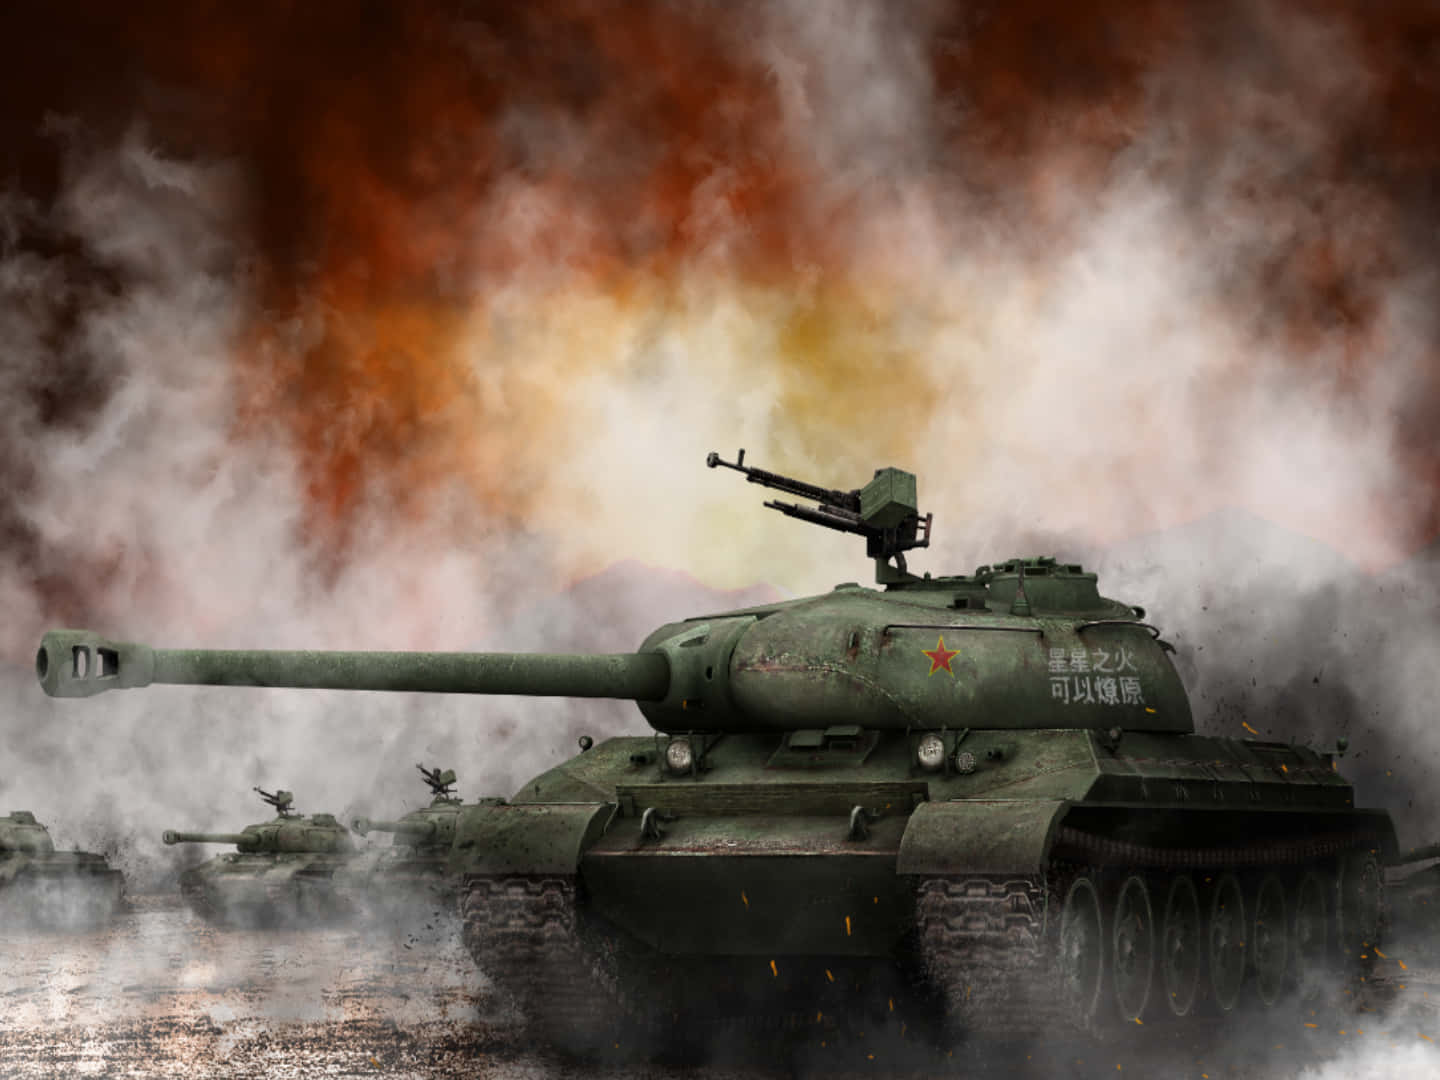 Pushing The Limits: Tank Foreground Against a Clear Sky